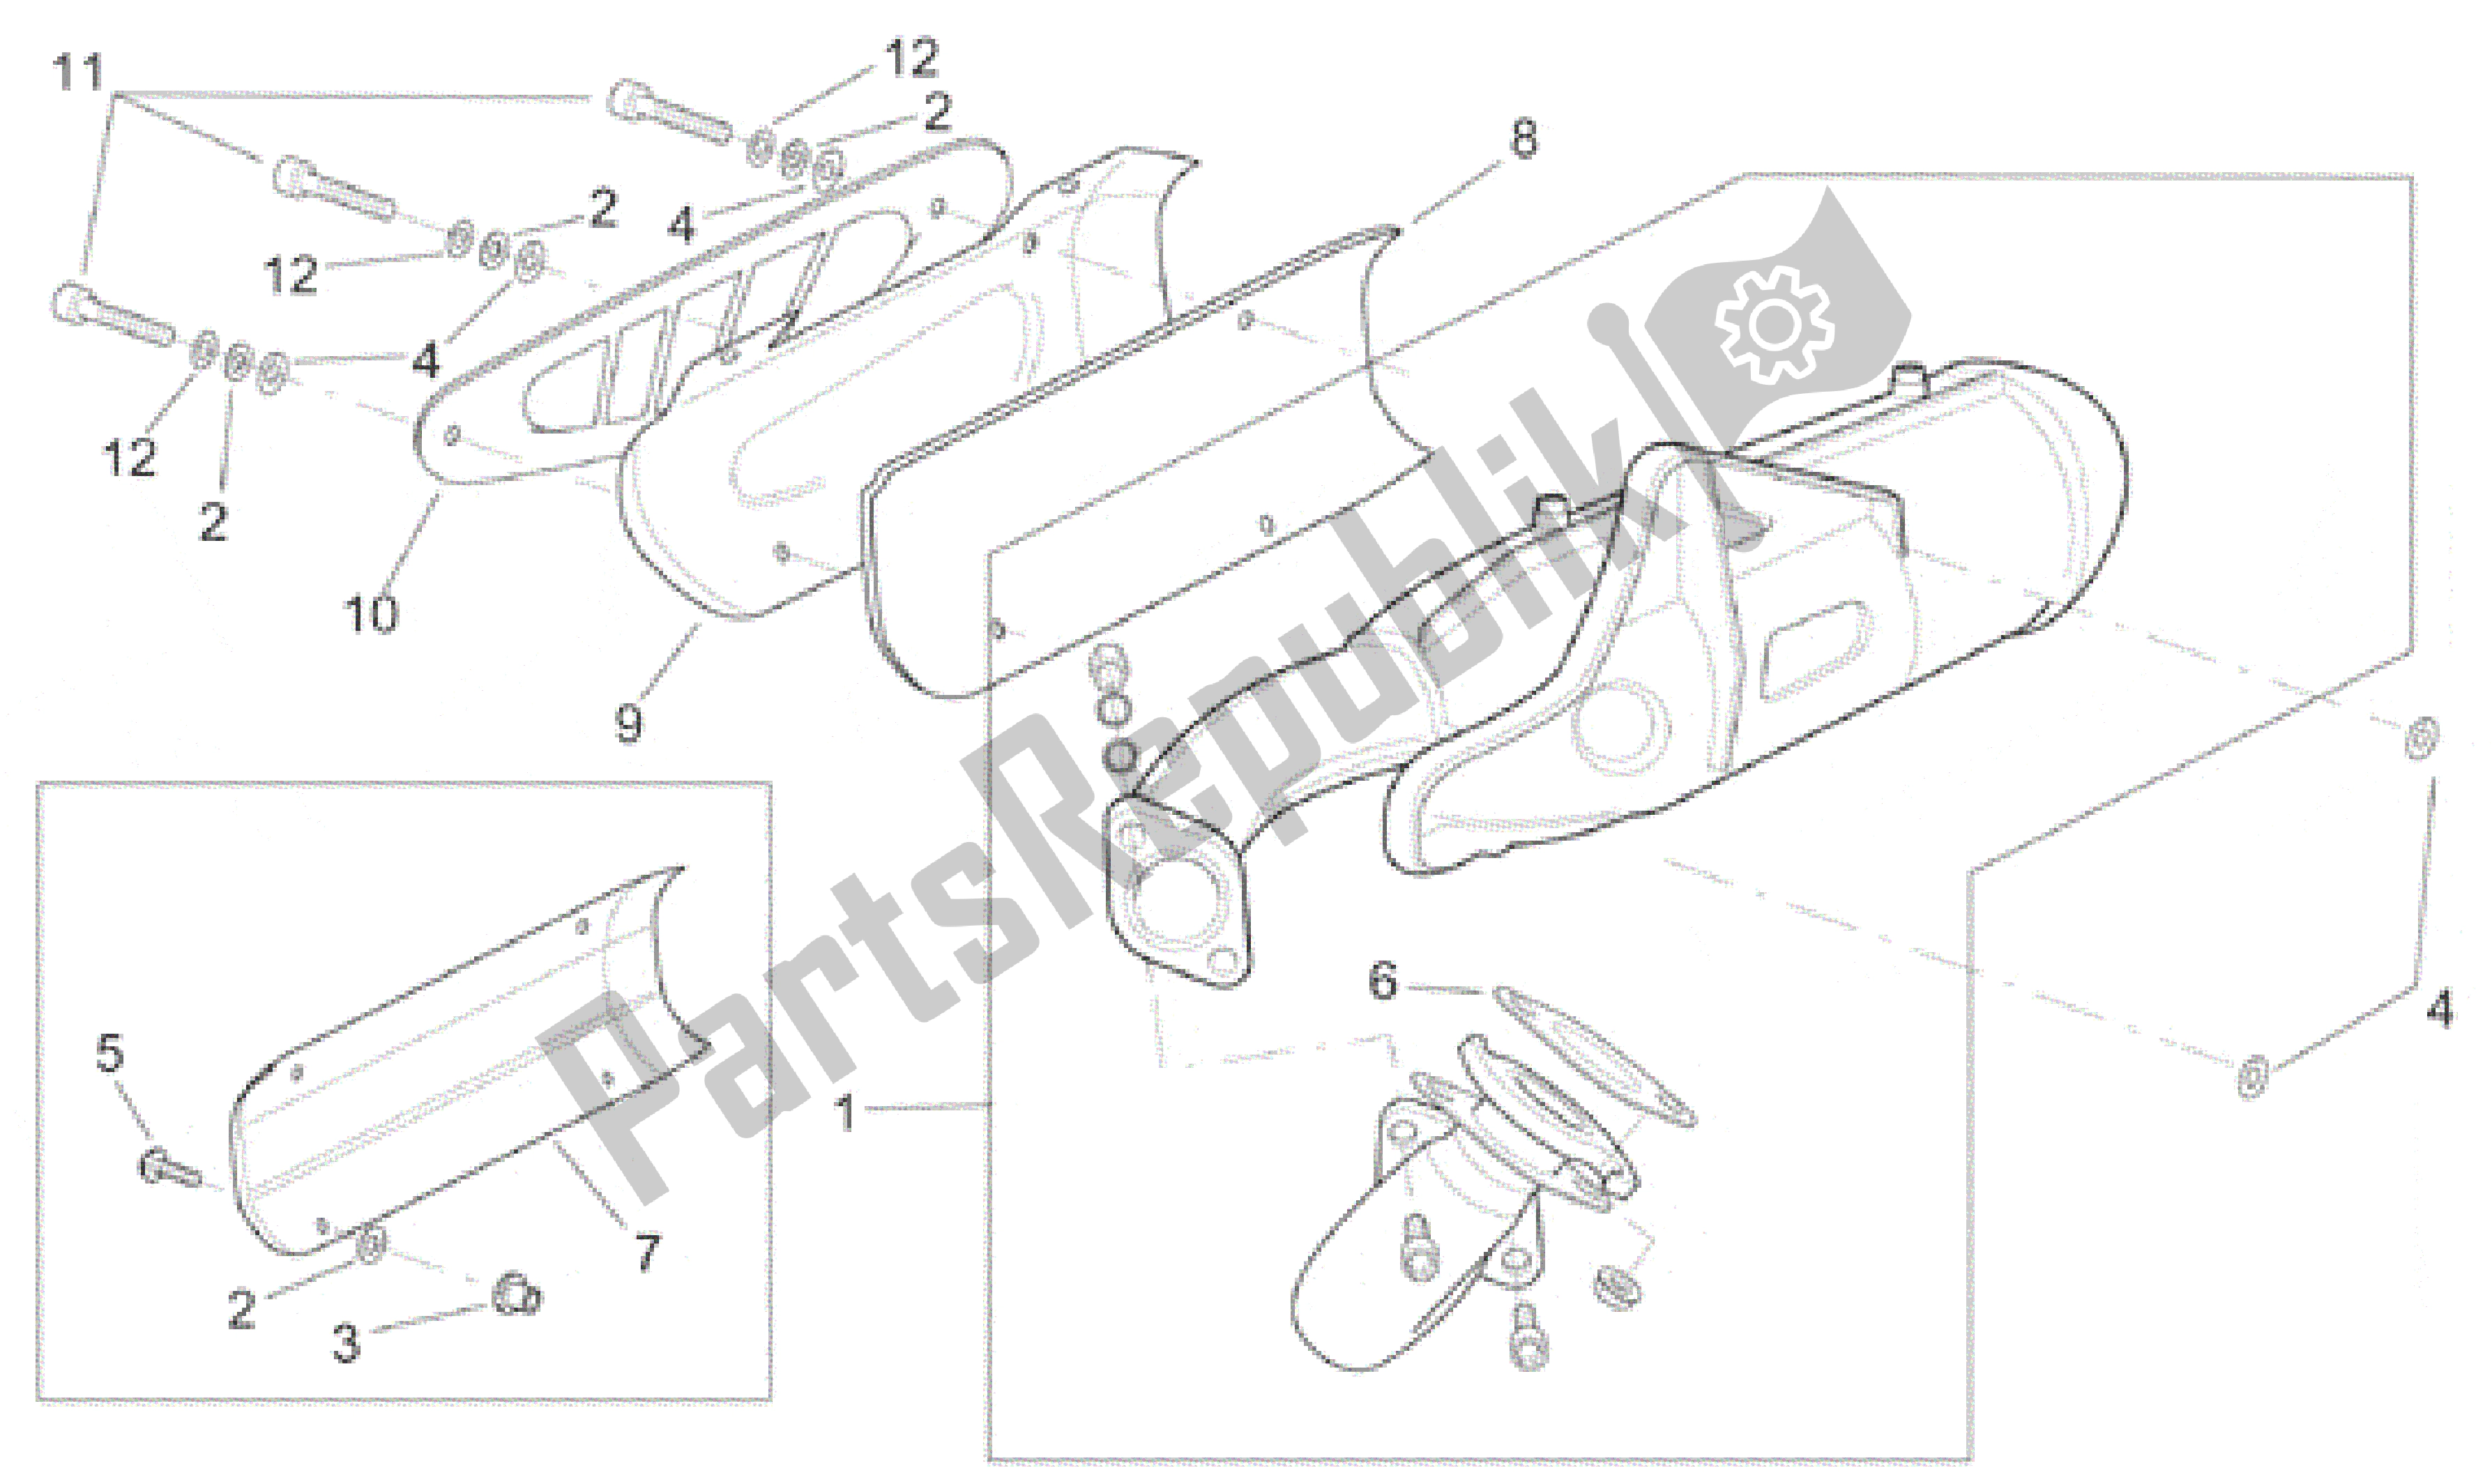 All parts for the Exhaust Unit of the Aprilia SR 125 1999 - 2001